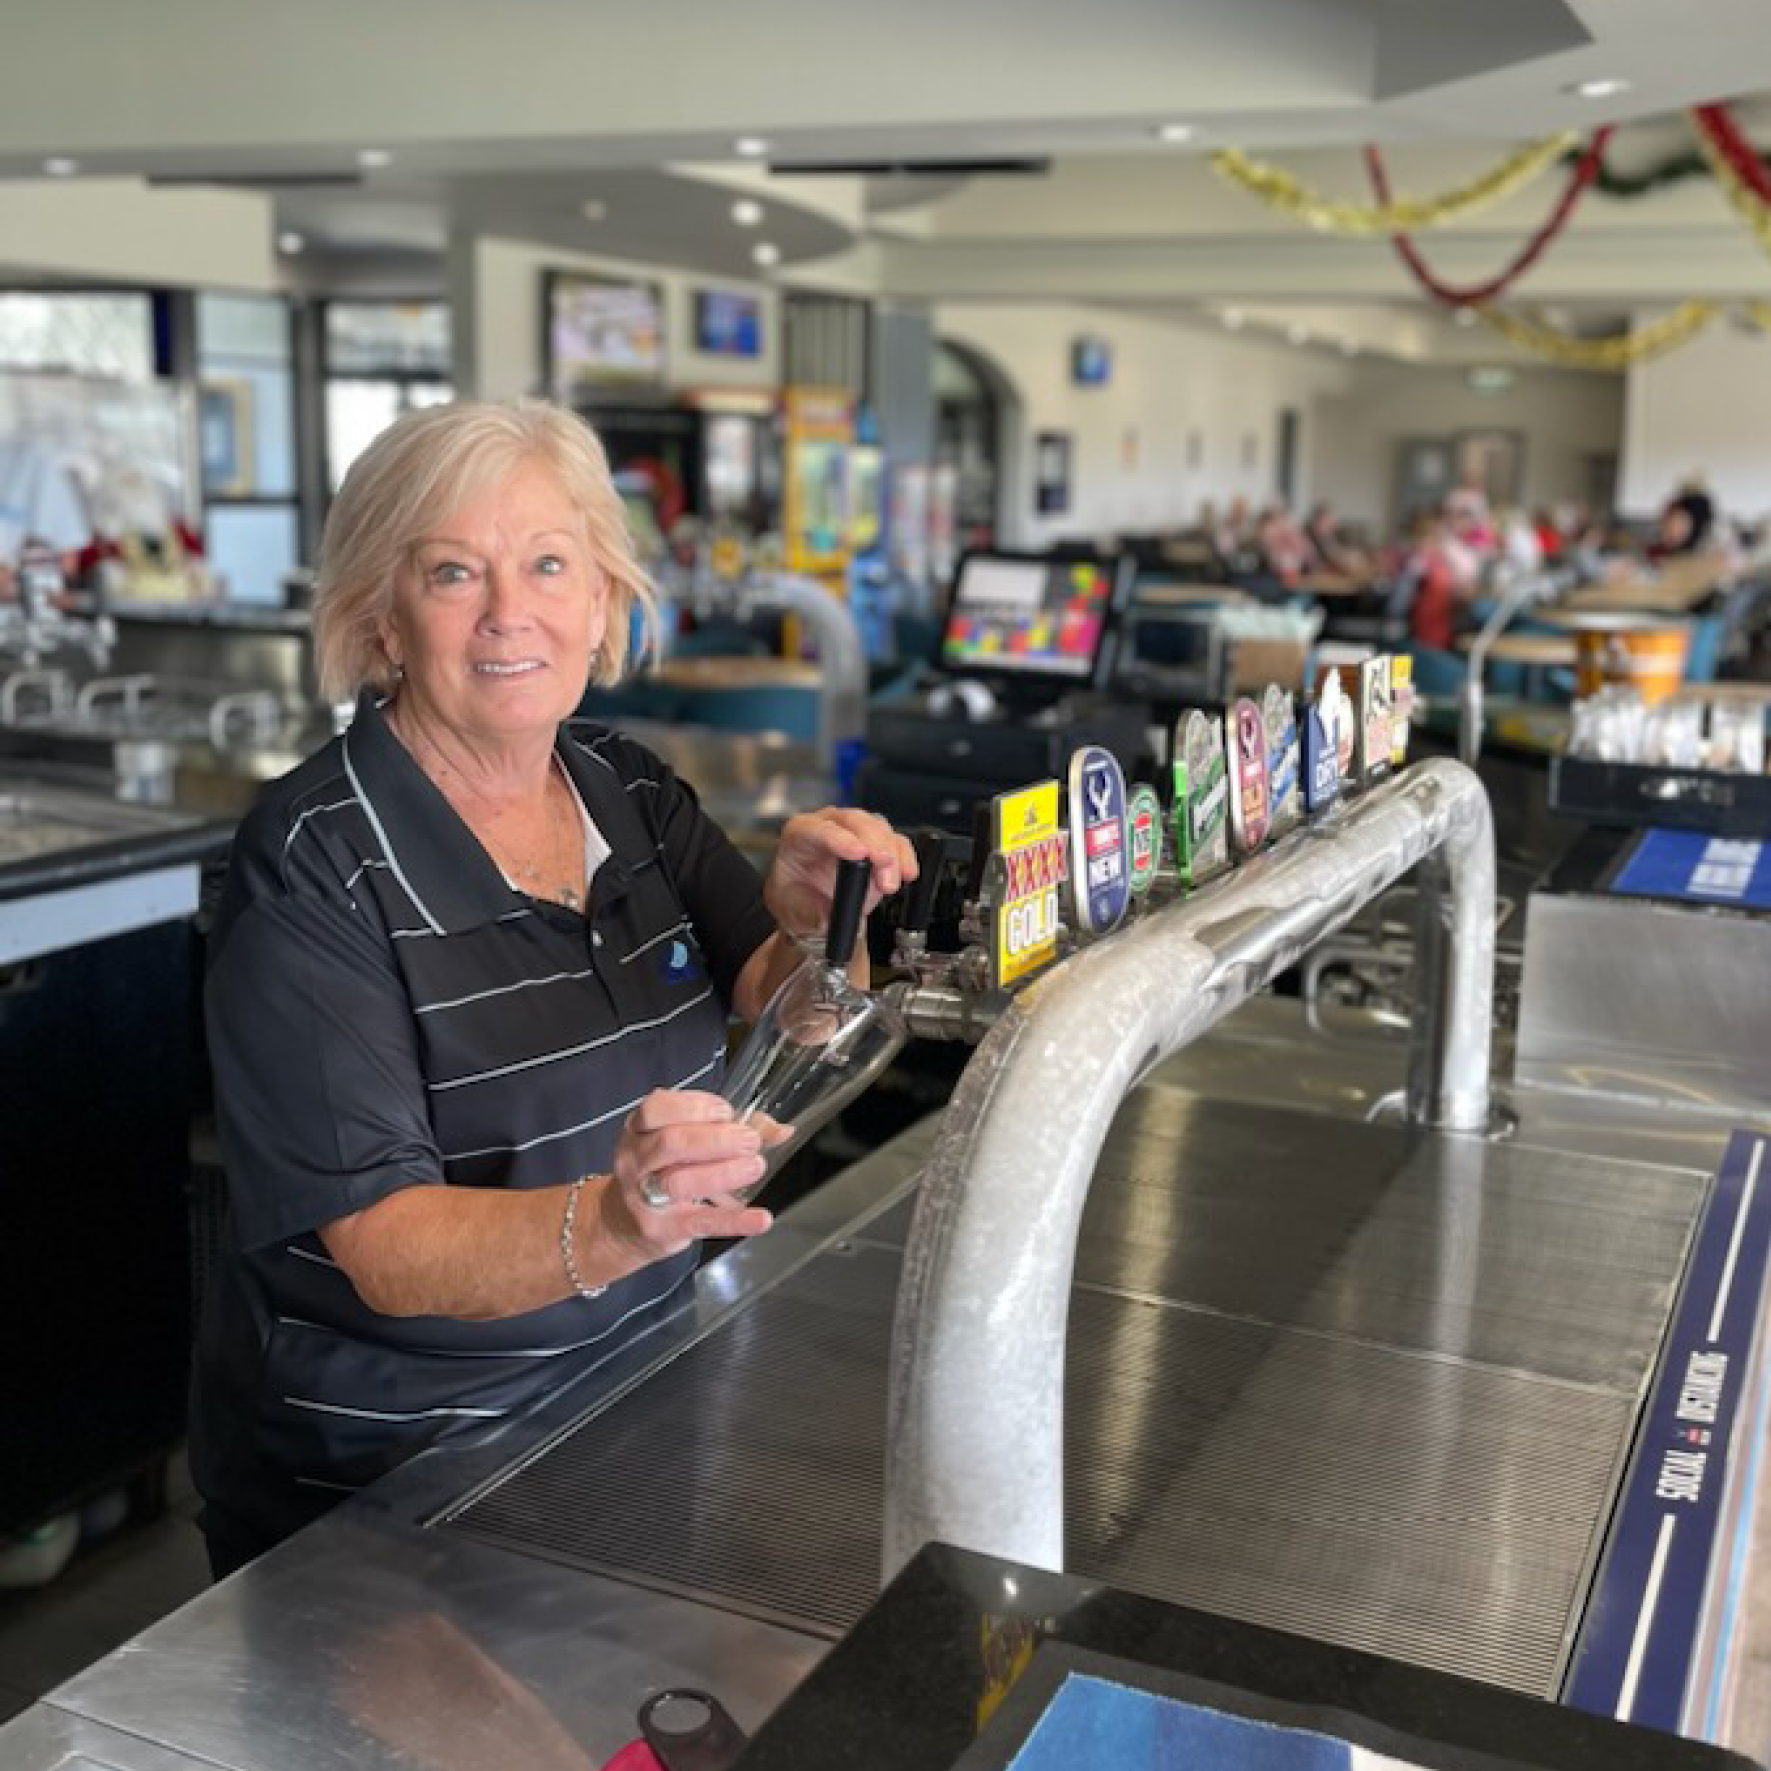 Beryl starts her bartending career at 66 years old